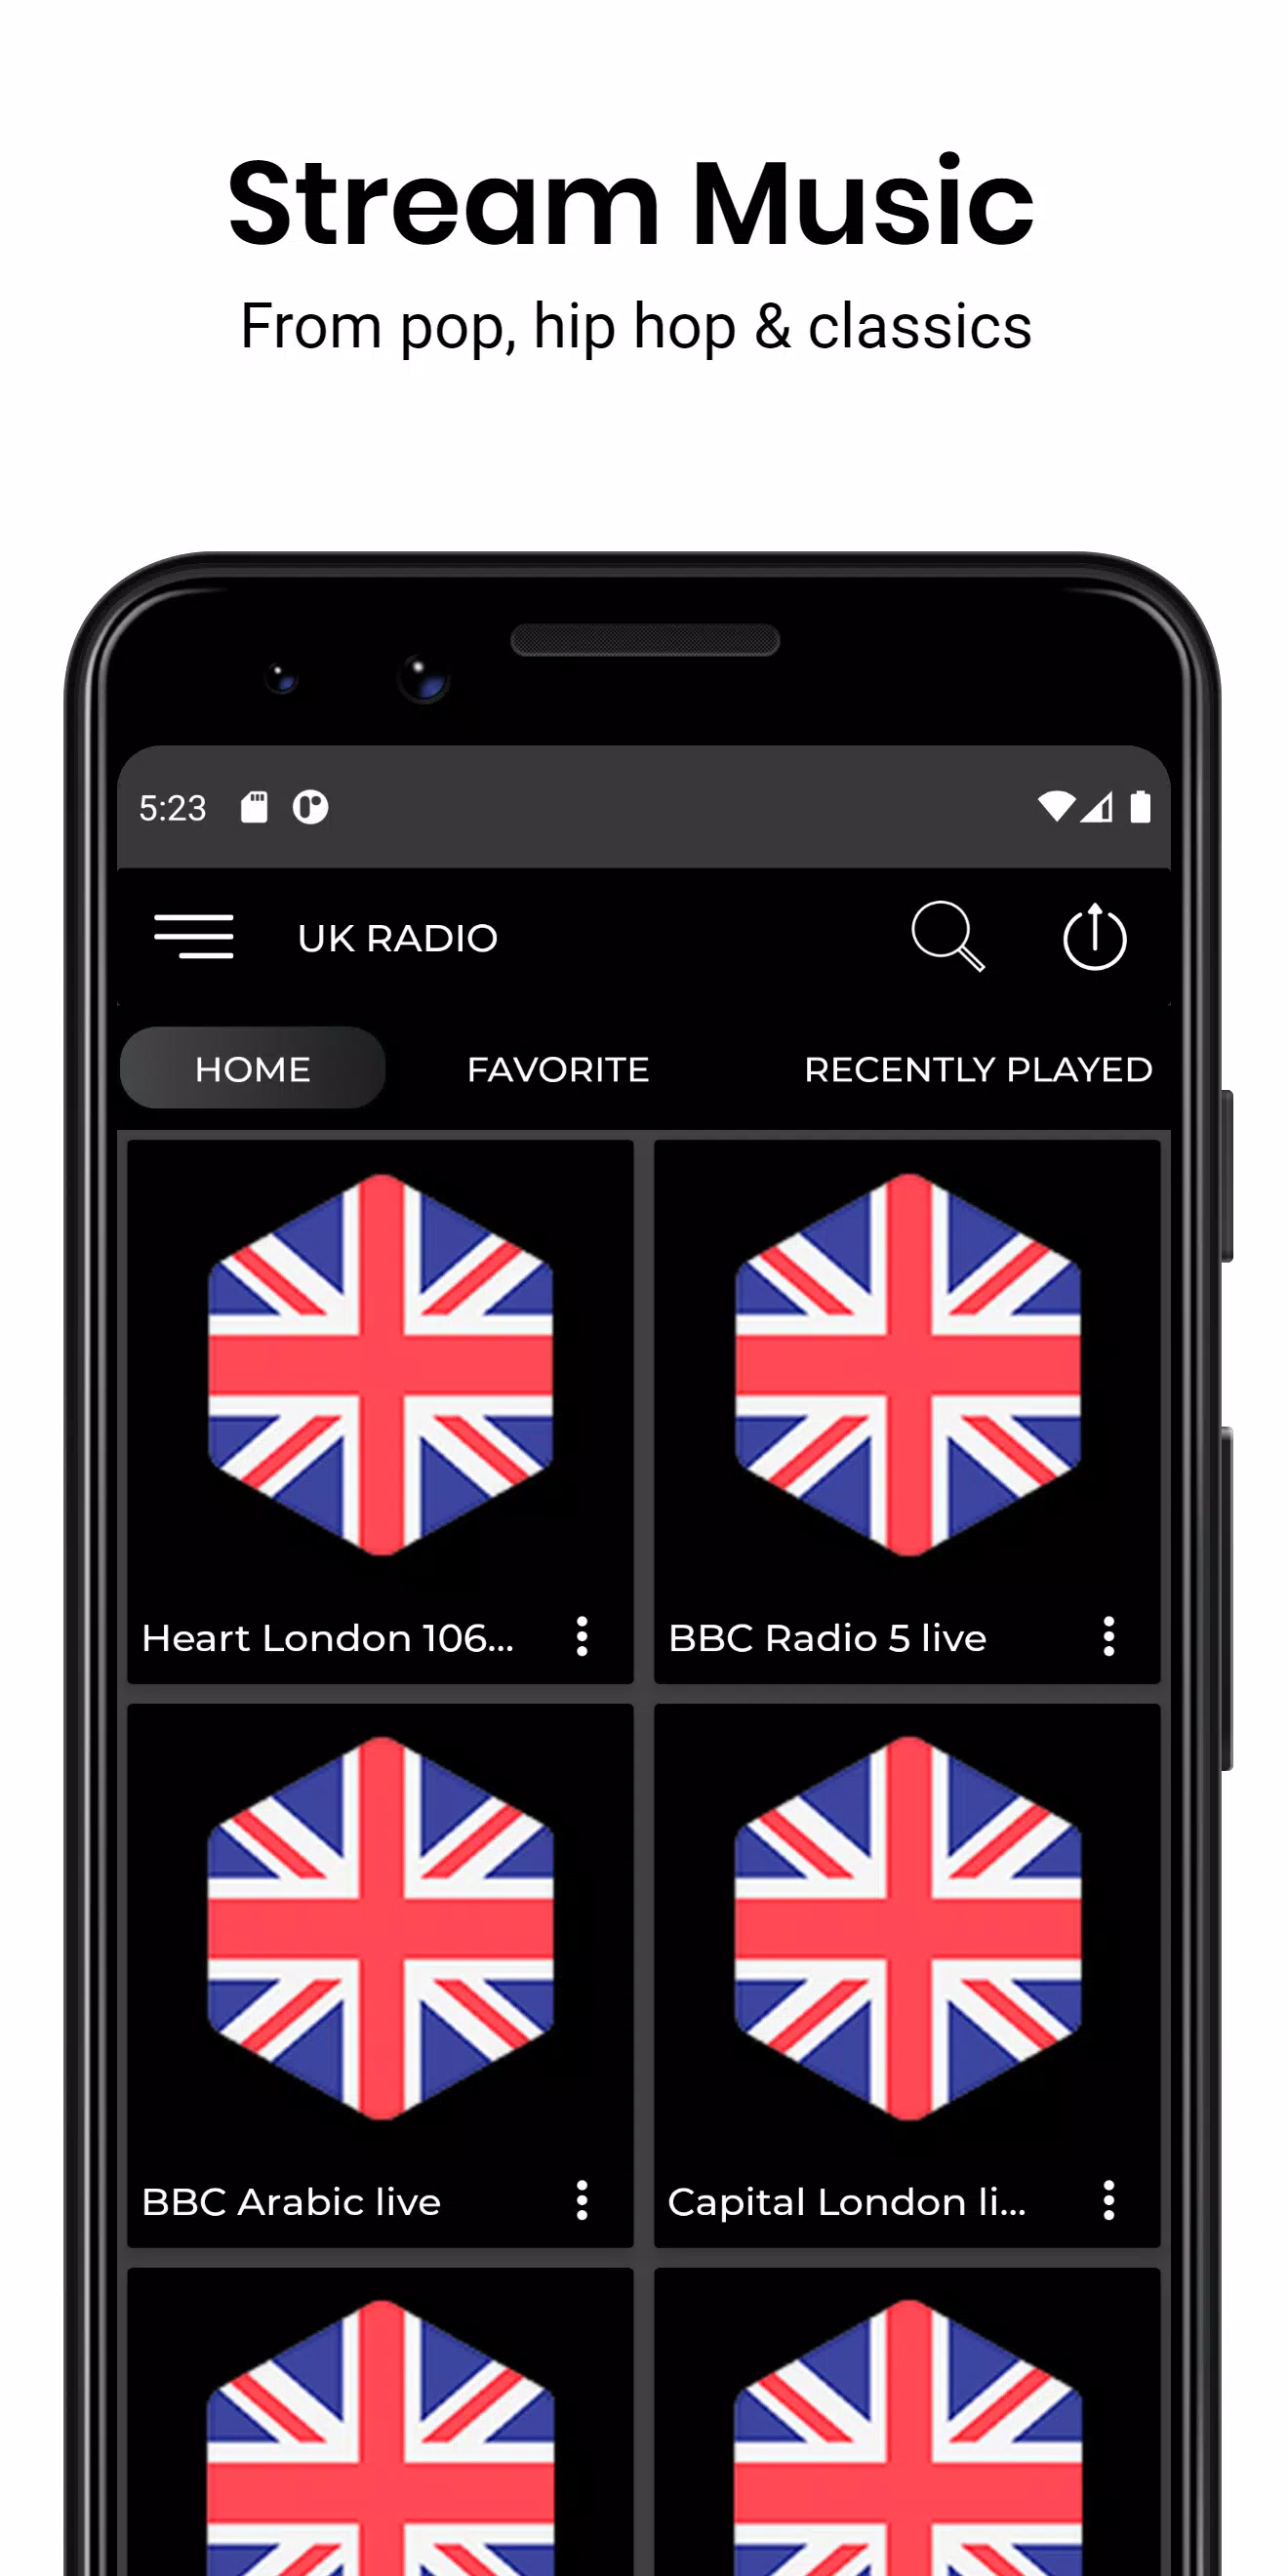 Hot Hits UK Radio App for Android - APK Download